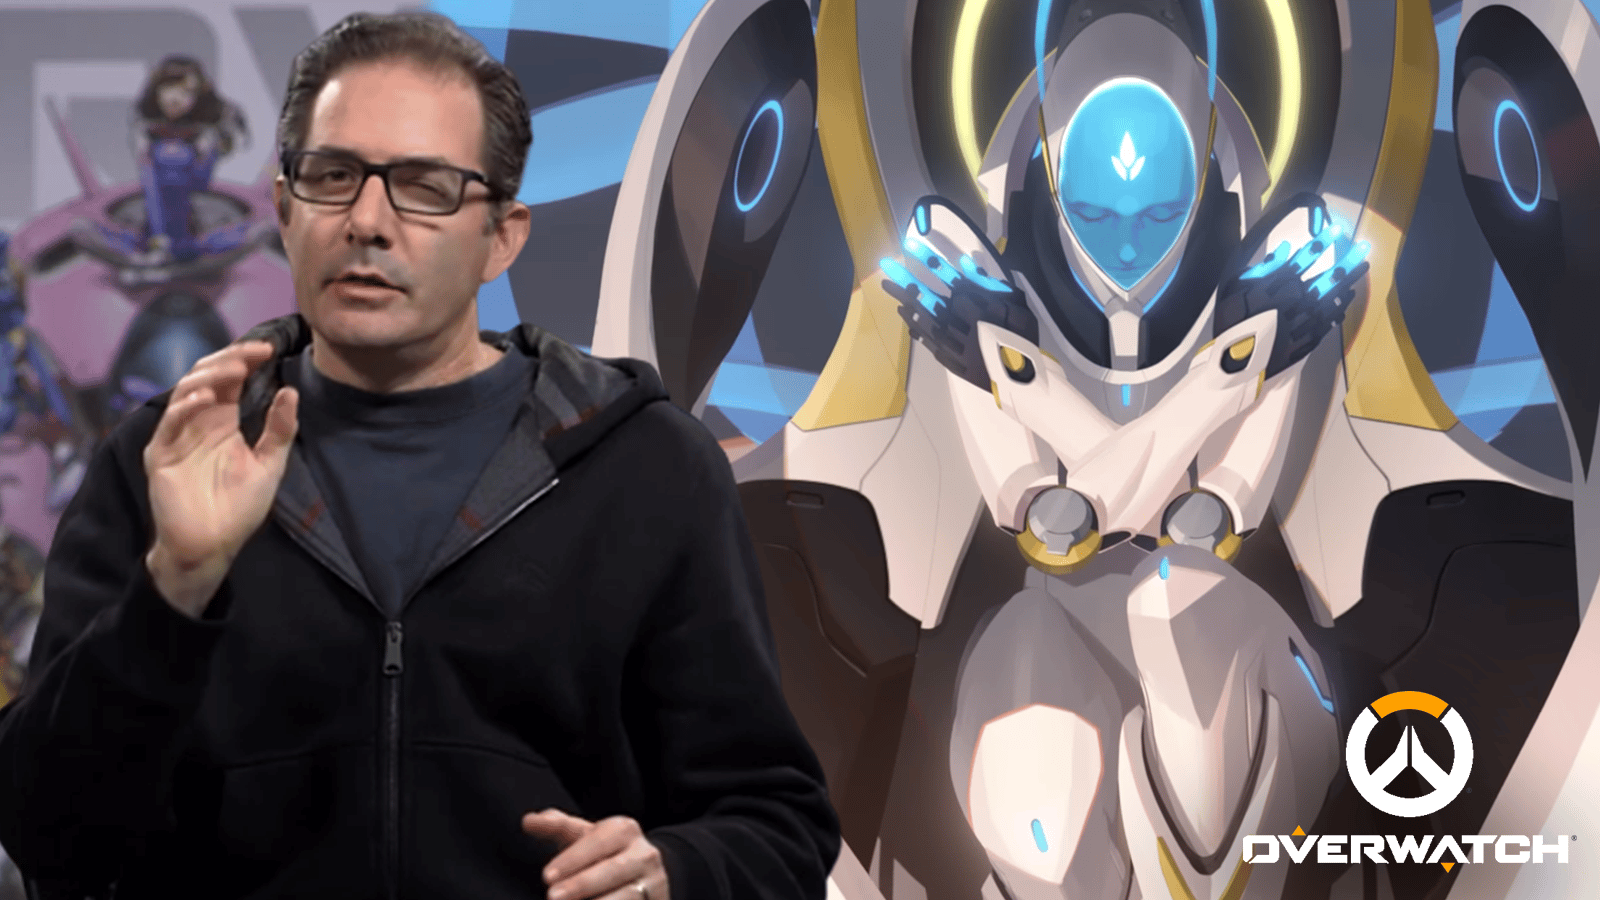 Jeff Kaplan has revealed why there will be no more Overwatch heroes